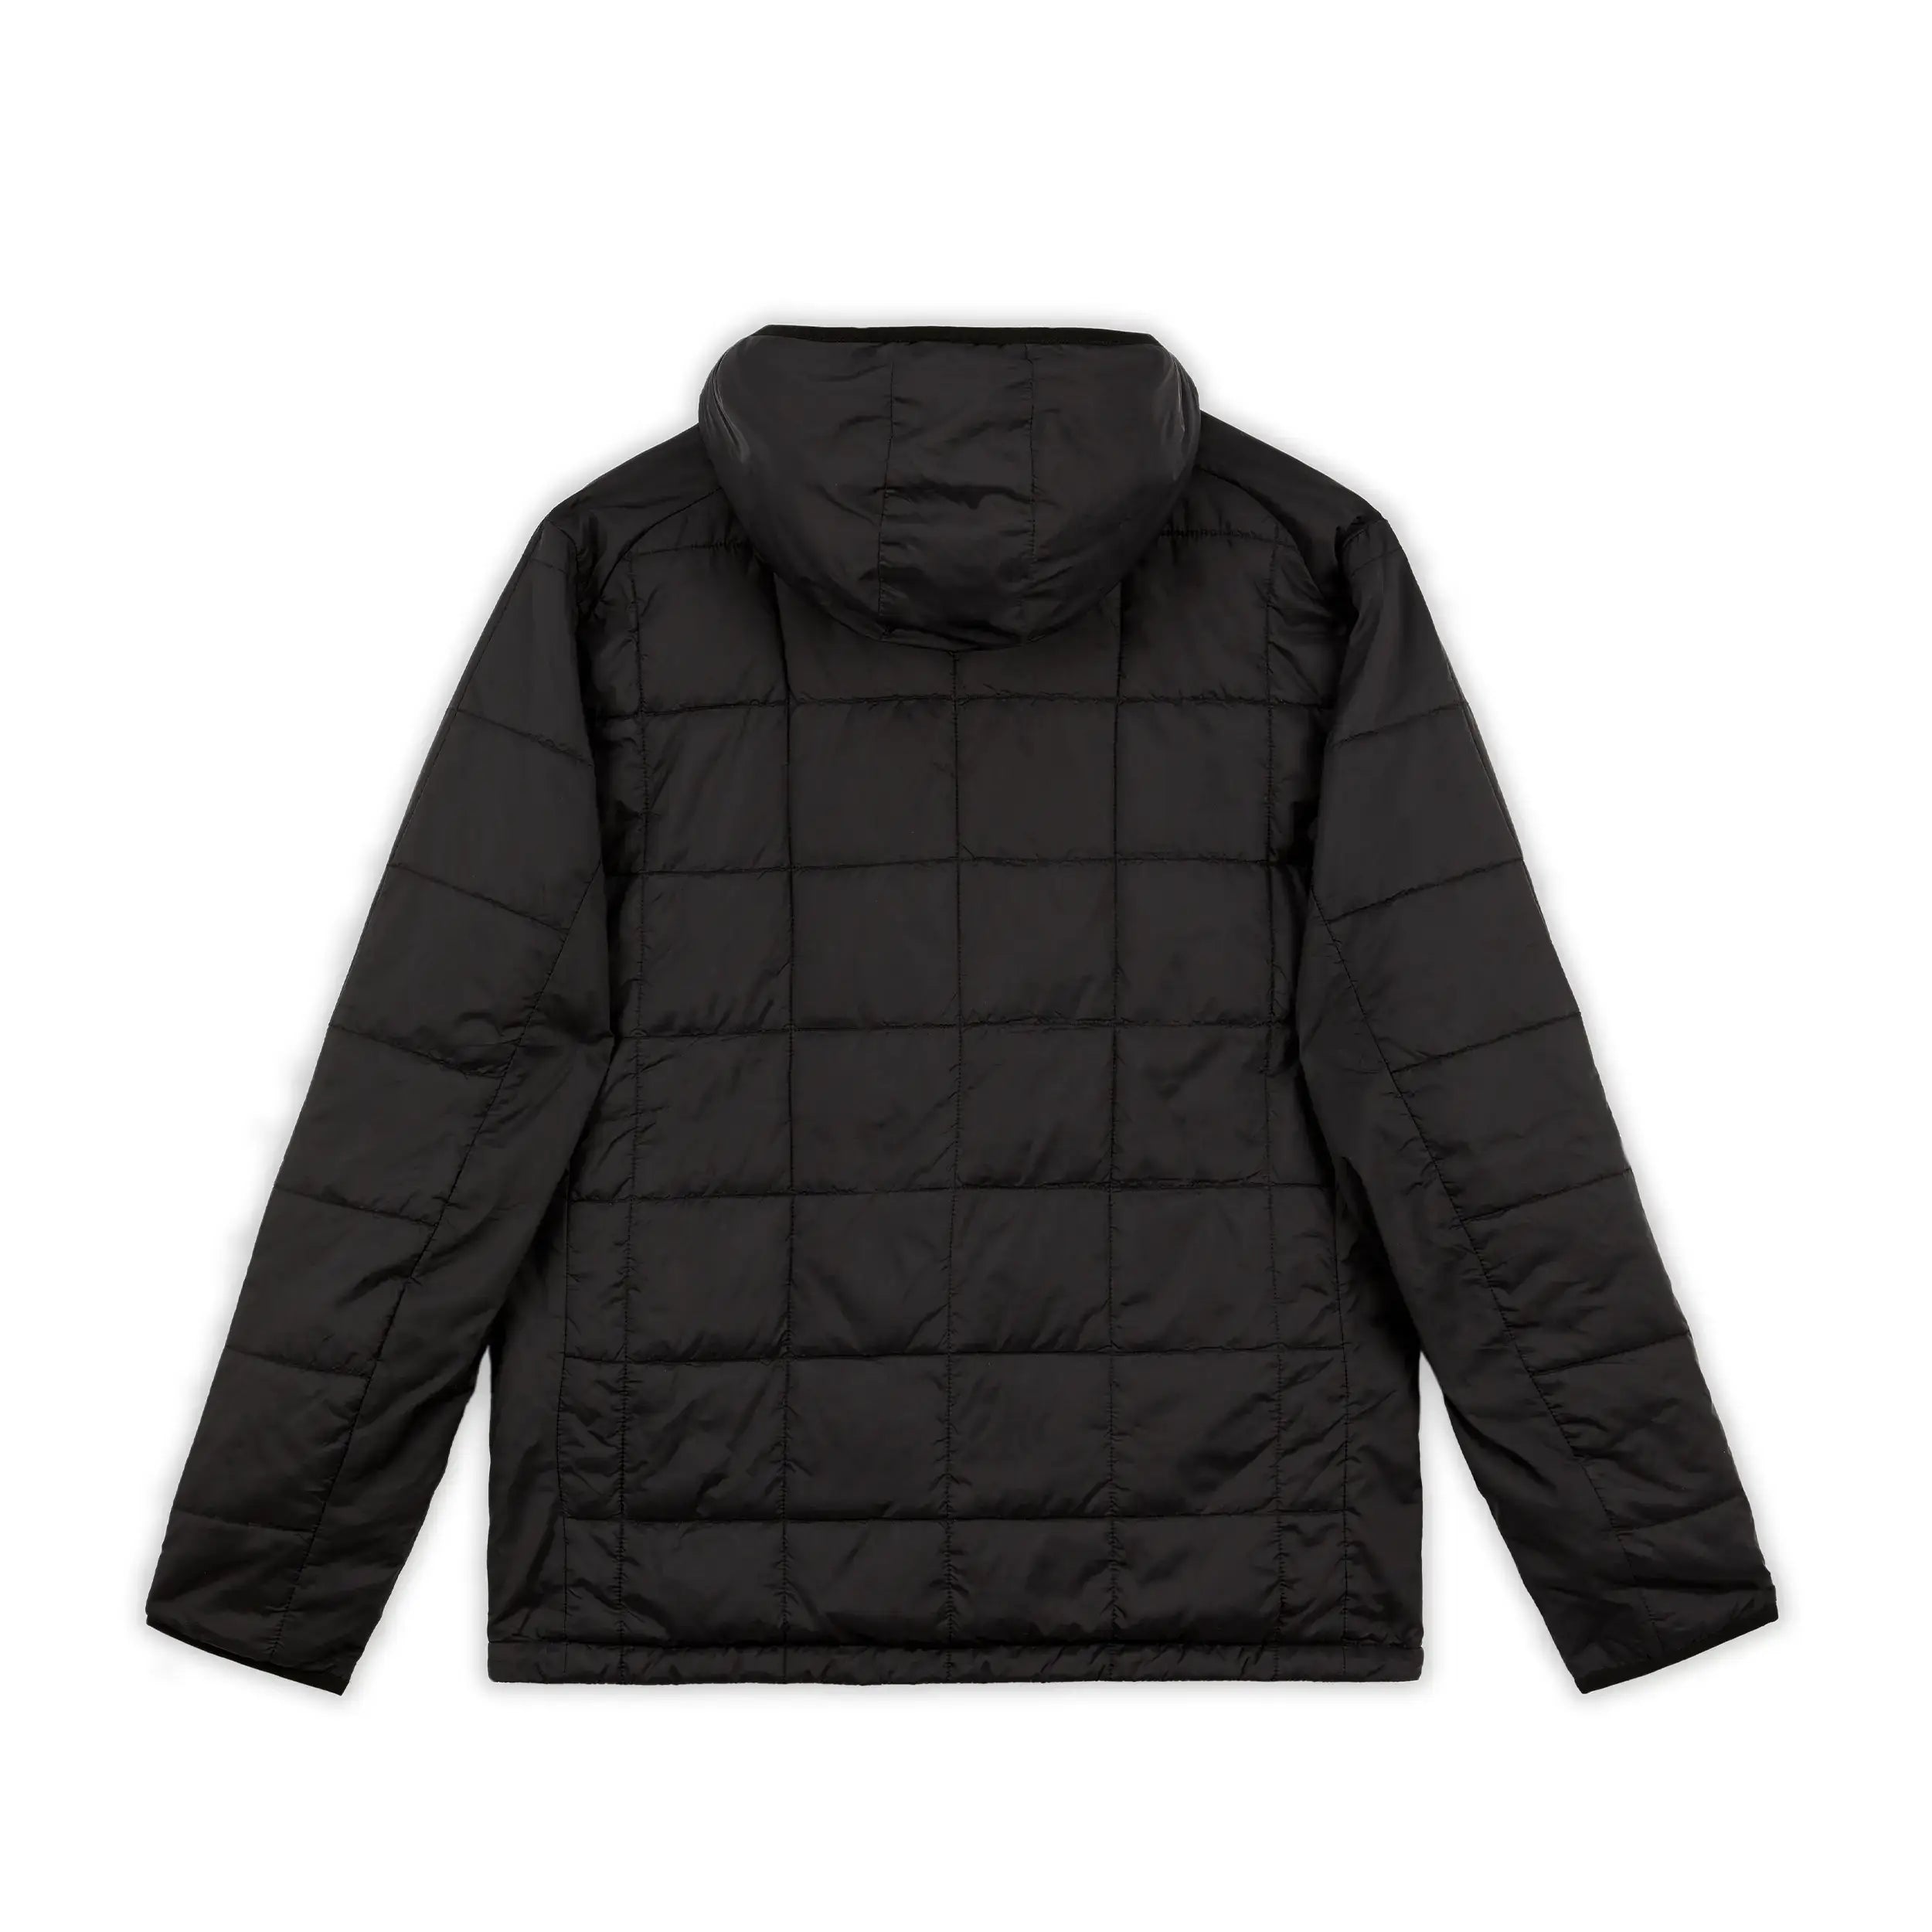 W QUILTED FLEECE JOGGER [BLK] XS